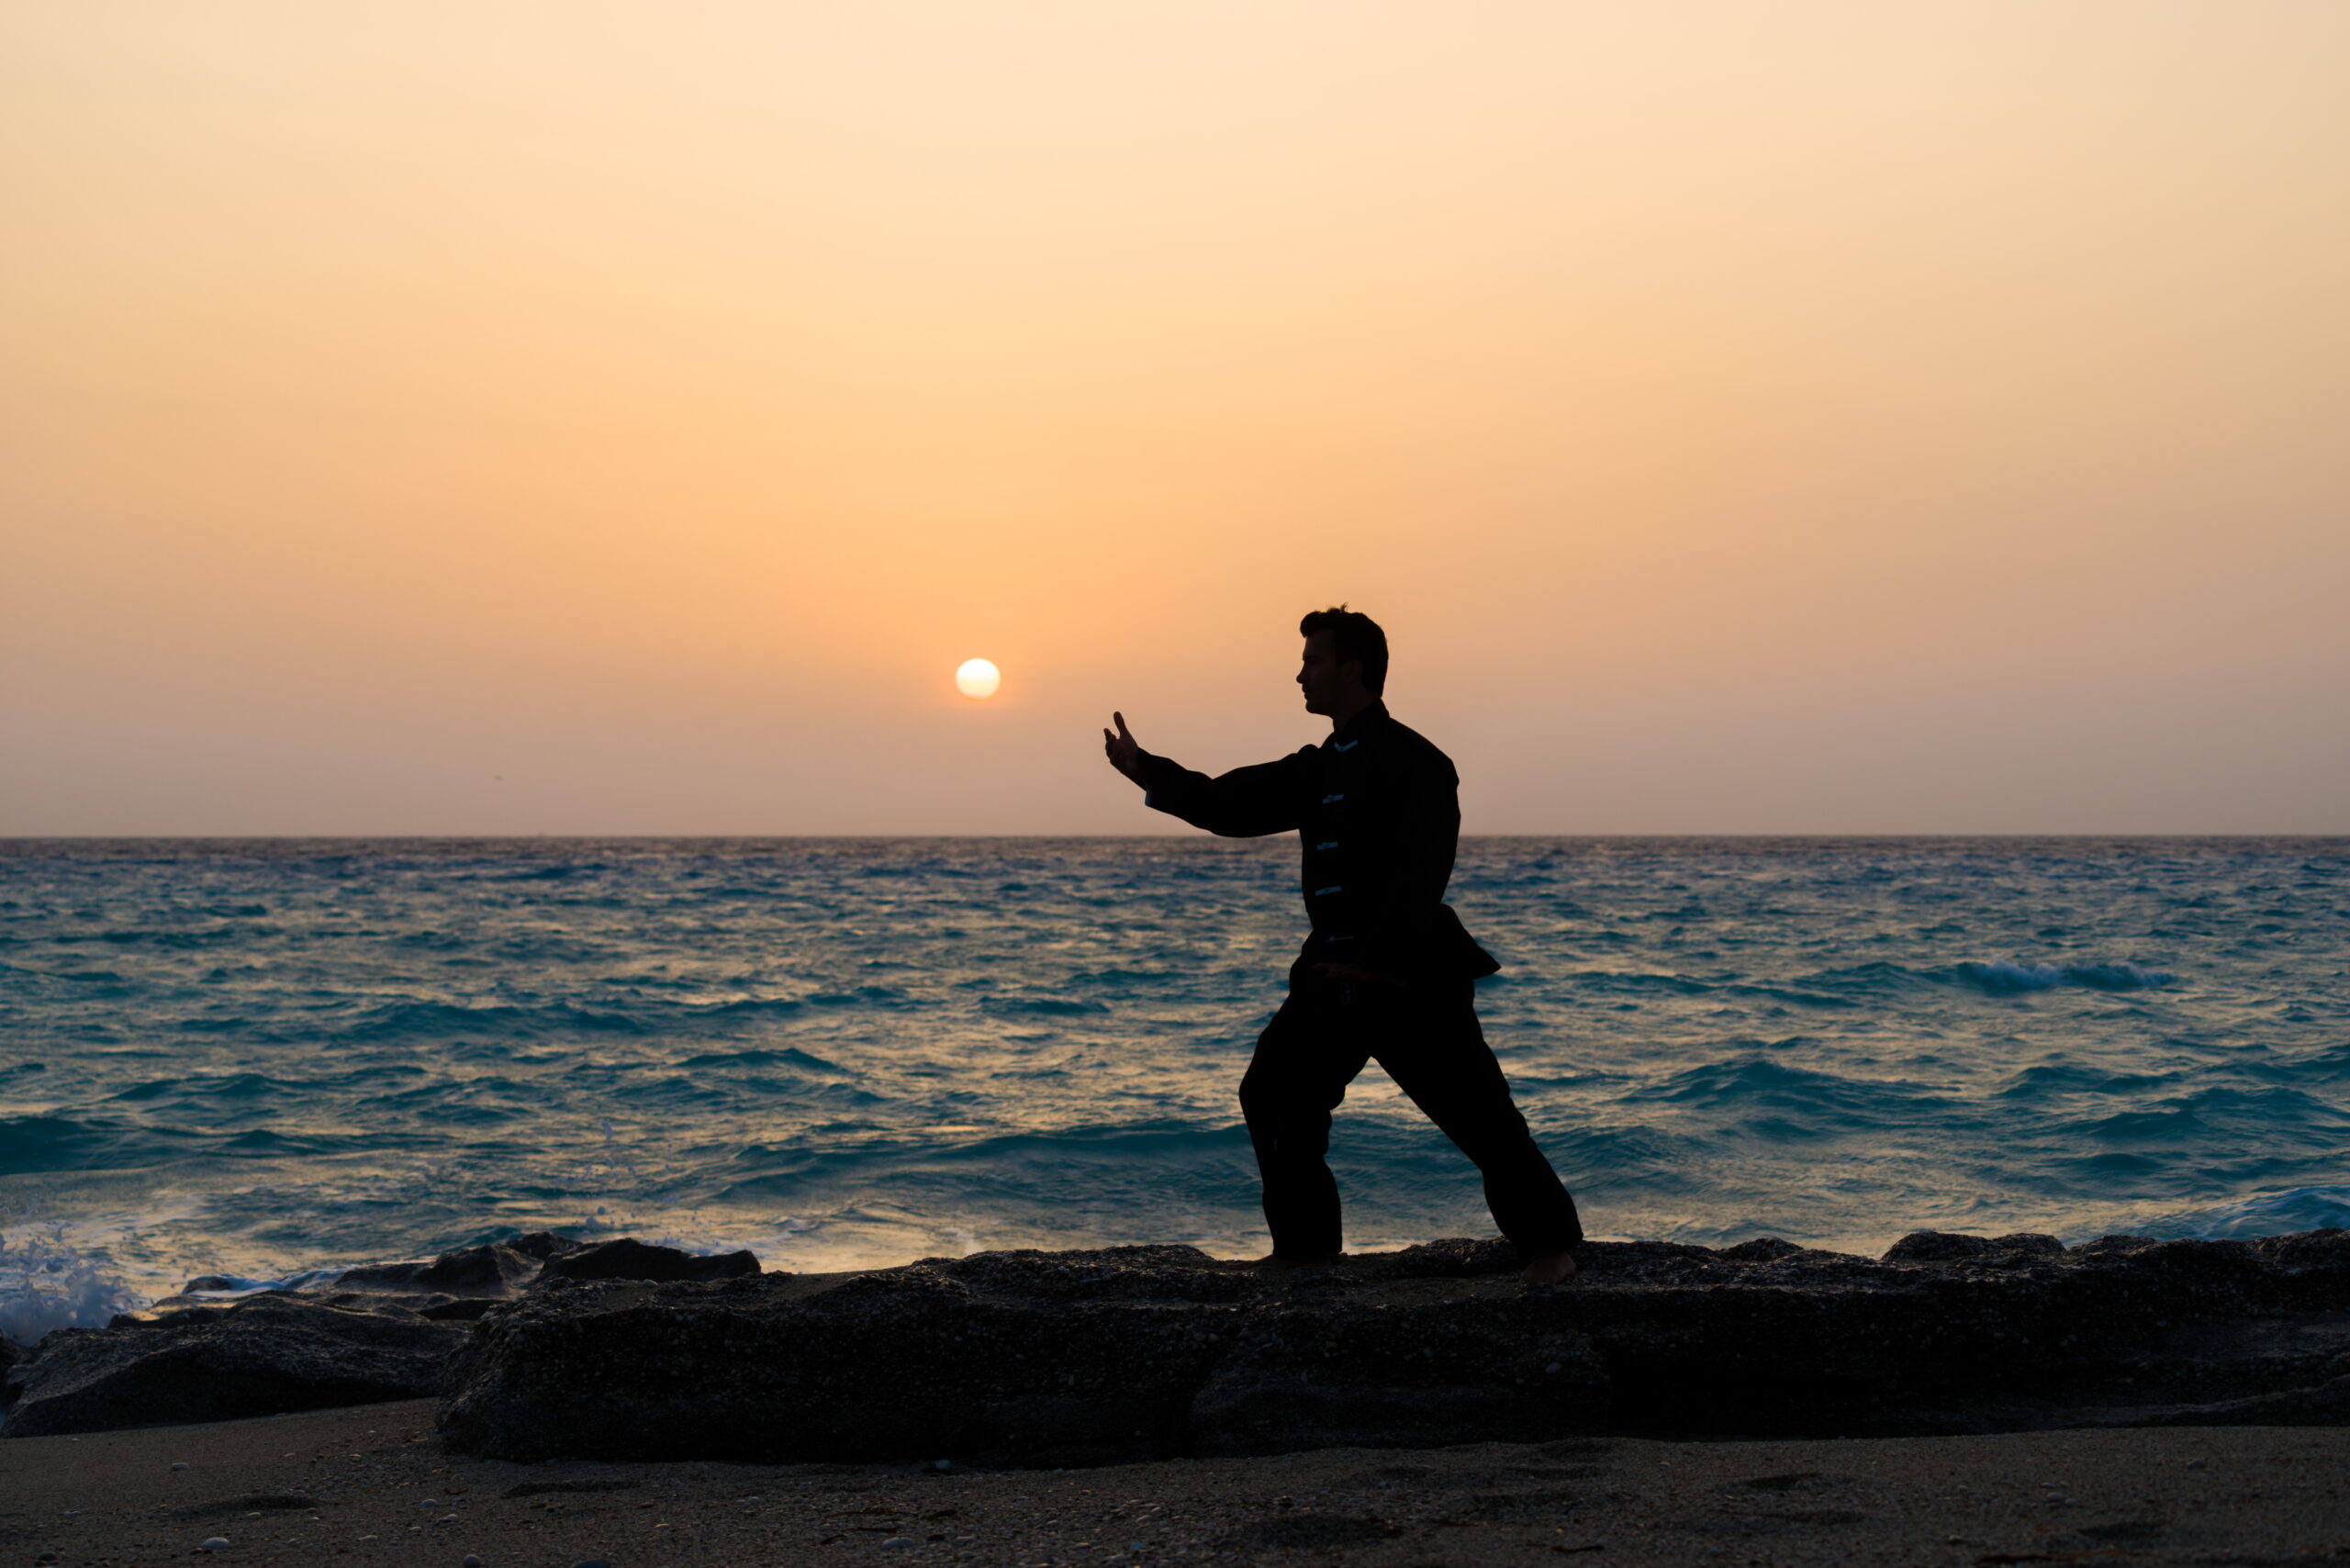 Man performs Kung Fu moves silhouetted against sunset - learn kung fu online